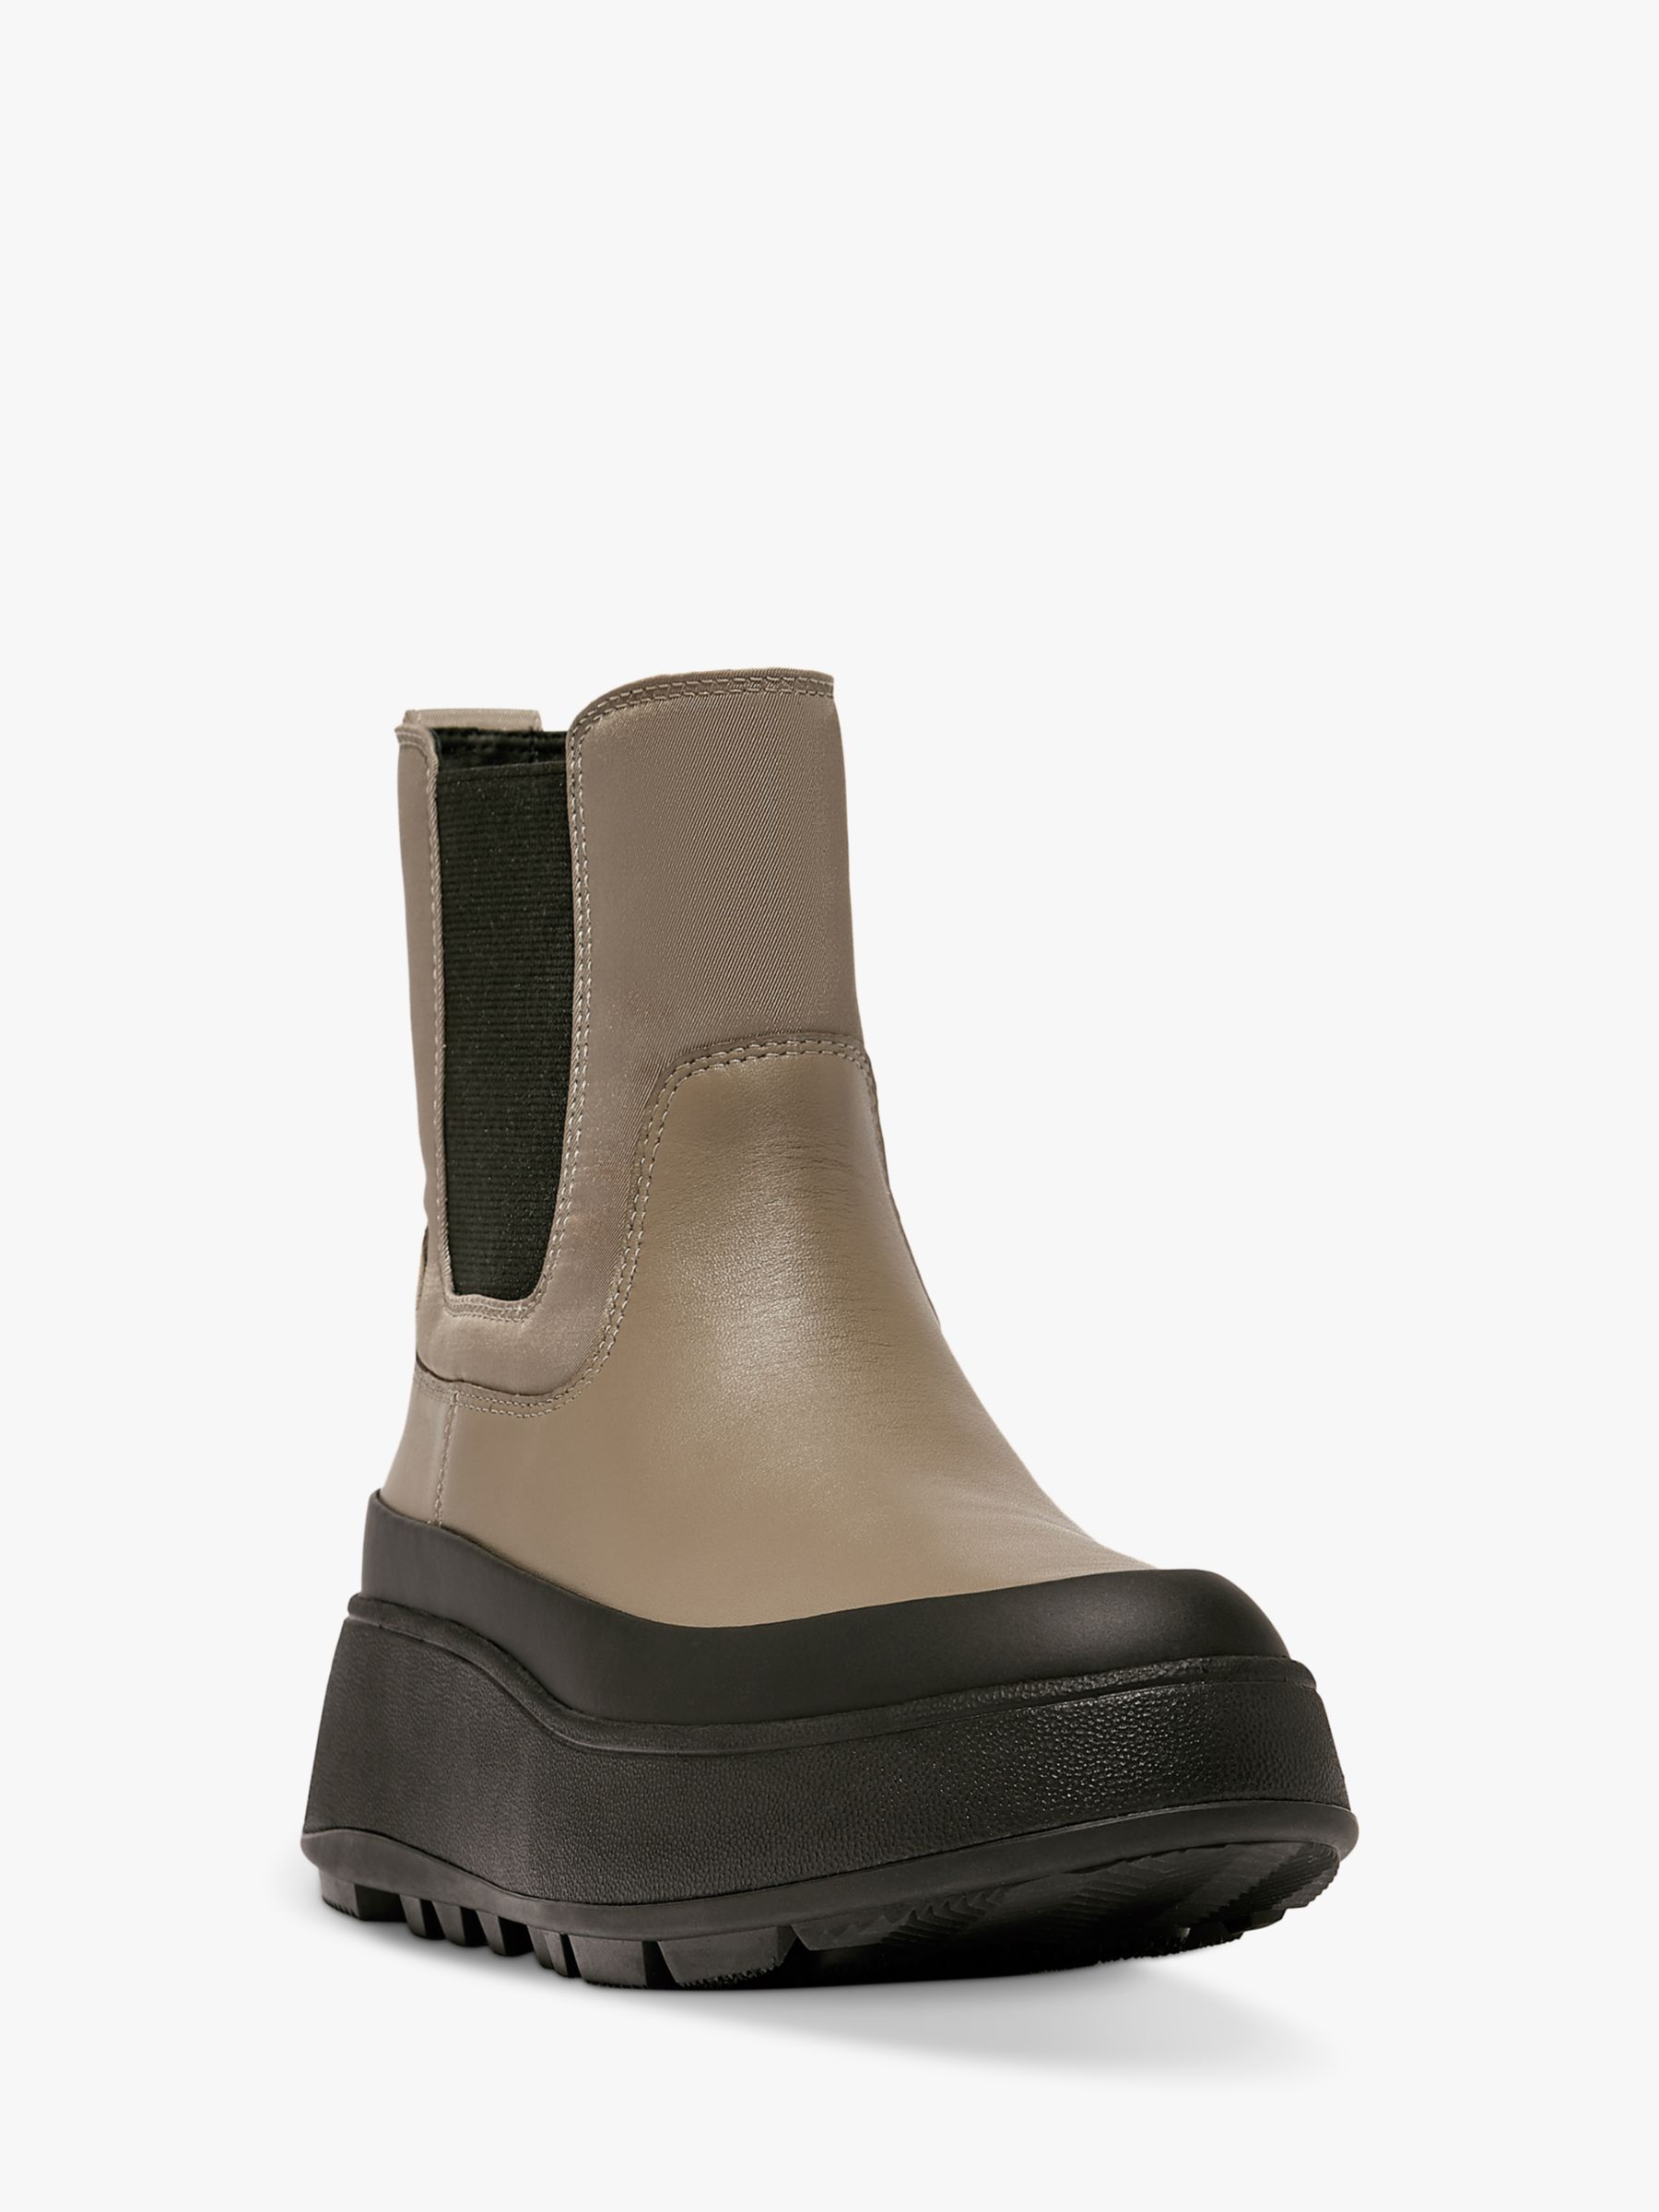 Buy FitFlop Water Resistant Fabric/Leather Flatform Chelsea Boots, Minky Grey Online at johnlewis.com